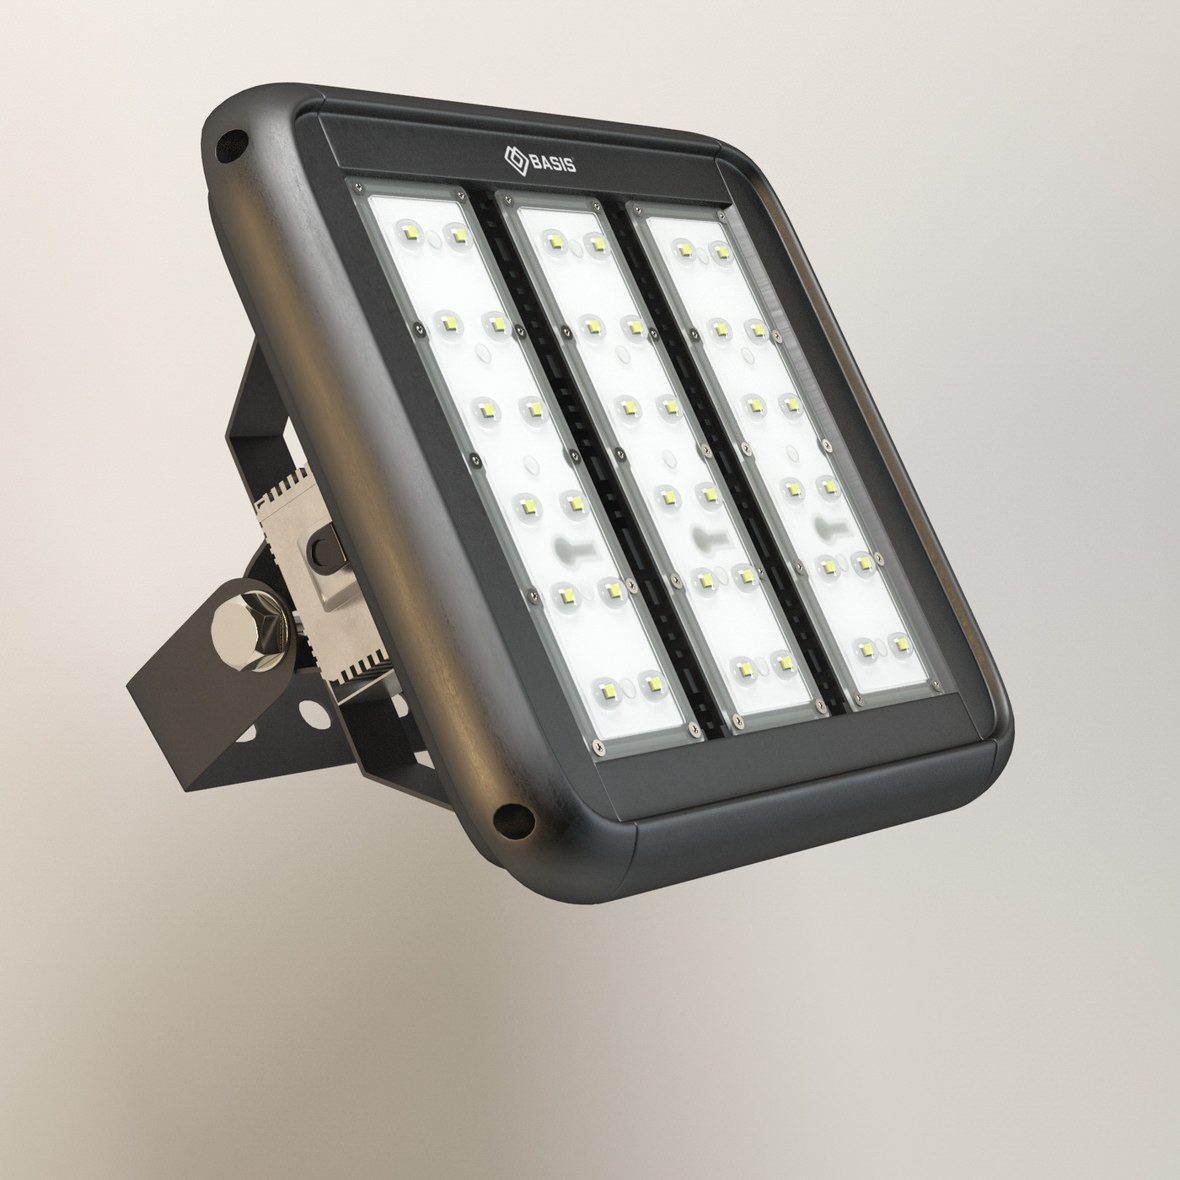 3D front view of industrial LED fixture in black case